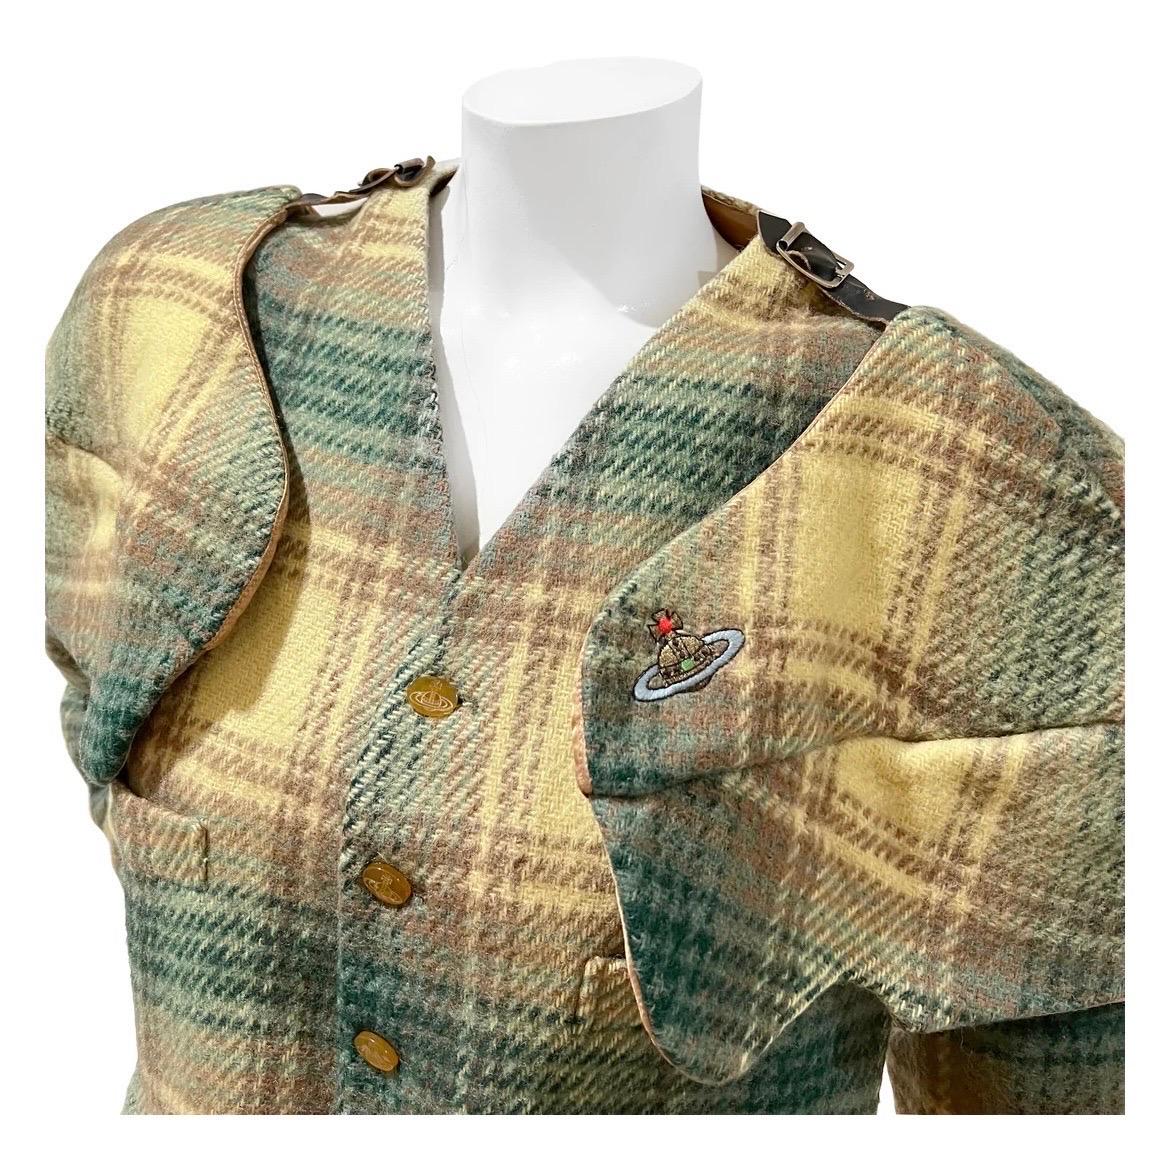 Vintage Plaid Armor Vest by Vivienne Westwood 
Fall / Winter 1988
Made in England
Green/yellow plaid
Vest has detachable and adjustable long sleeves 
Leather adjustable straps with silver-tone buckle detail
Front button closure 
Dual top slit